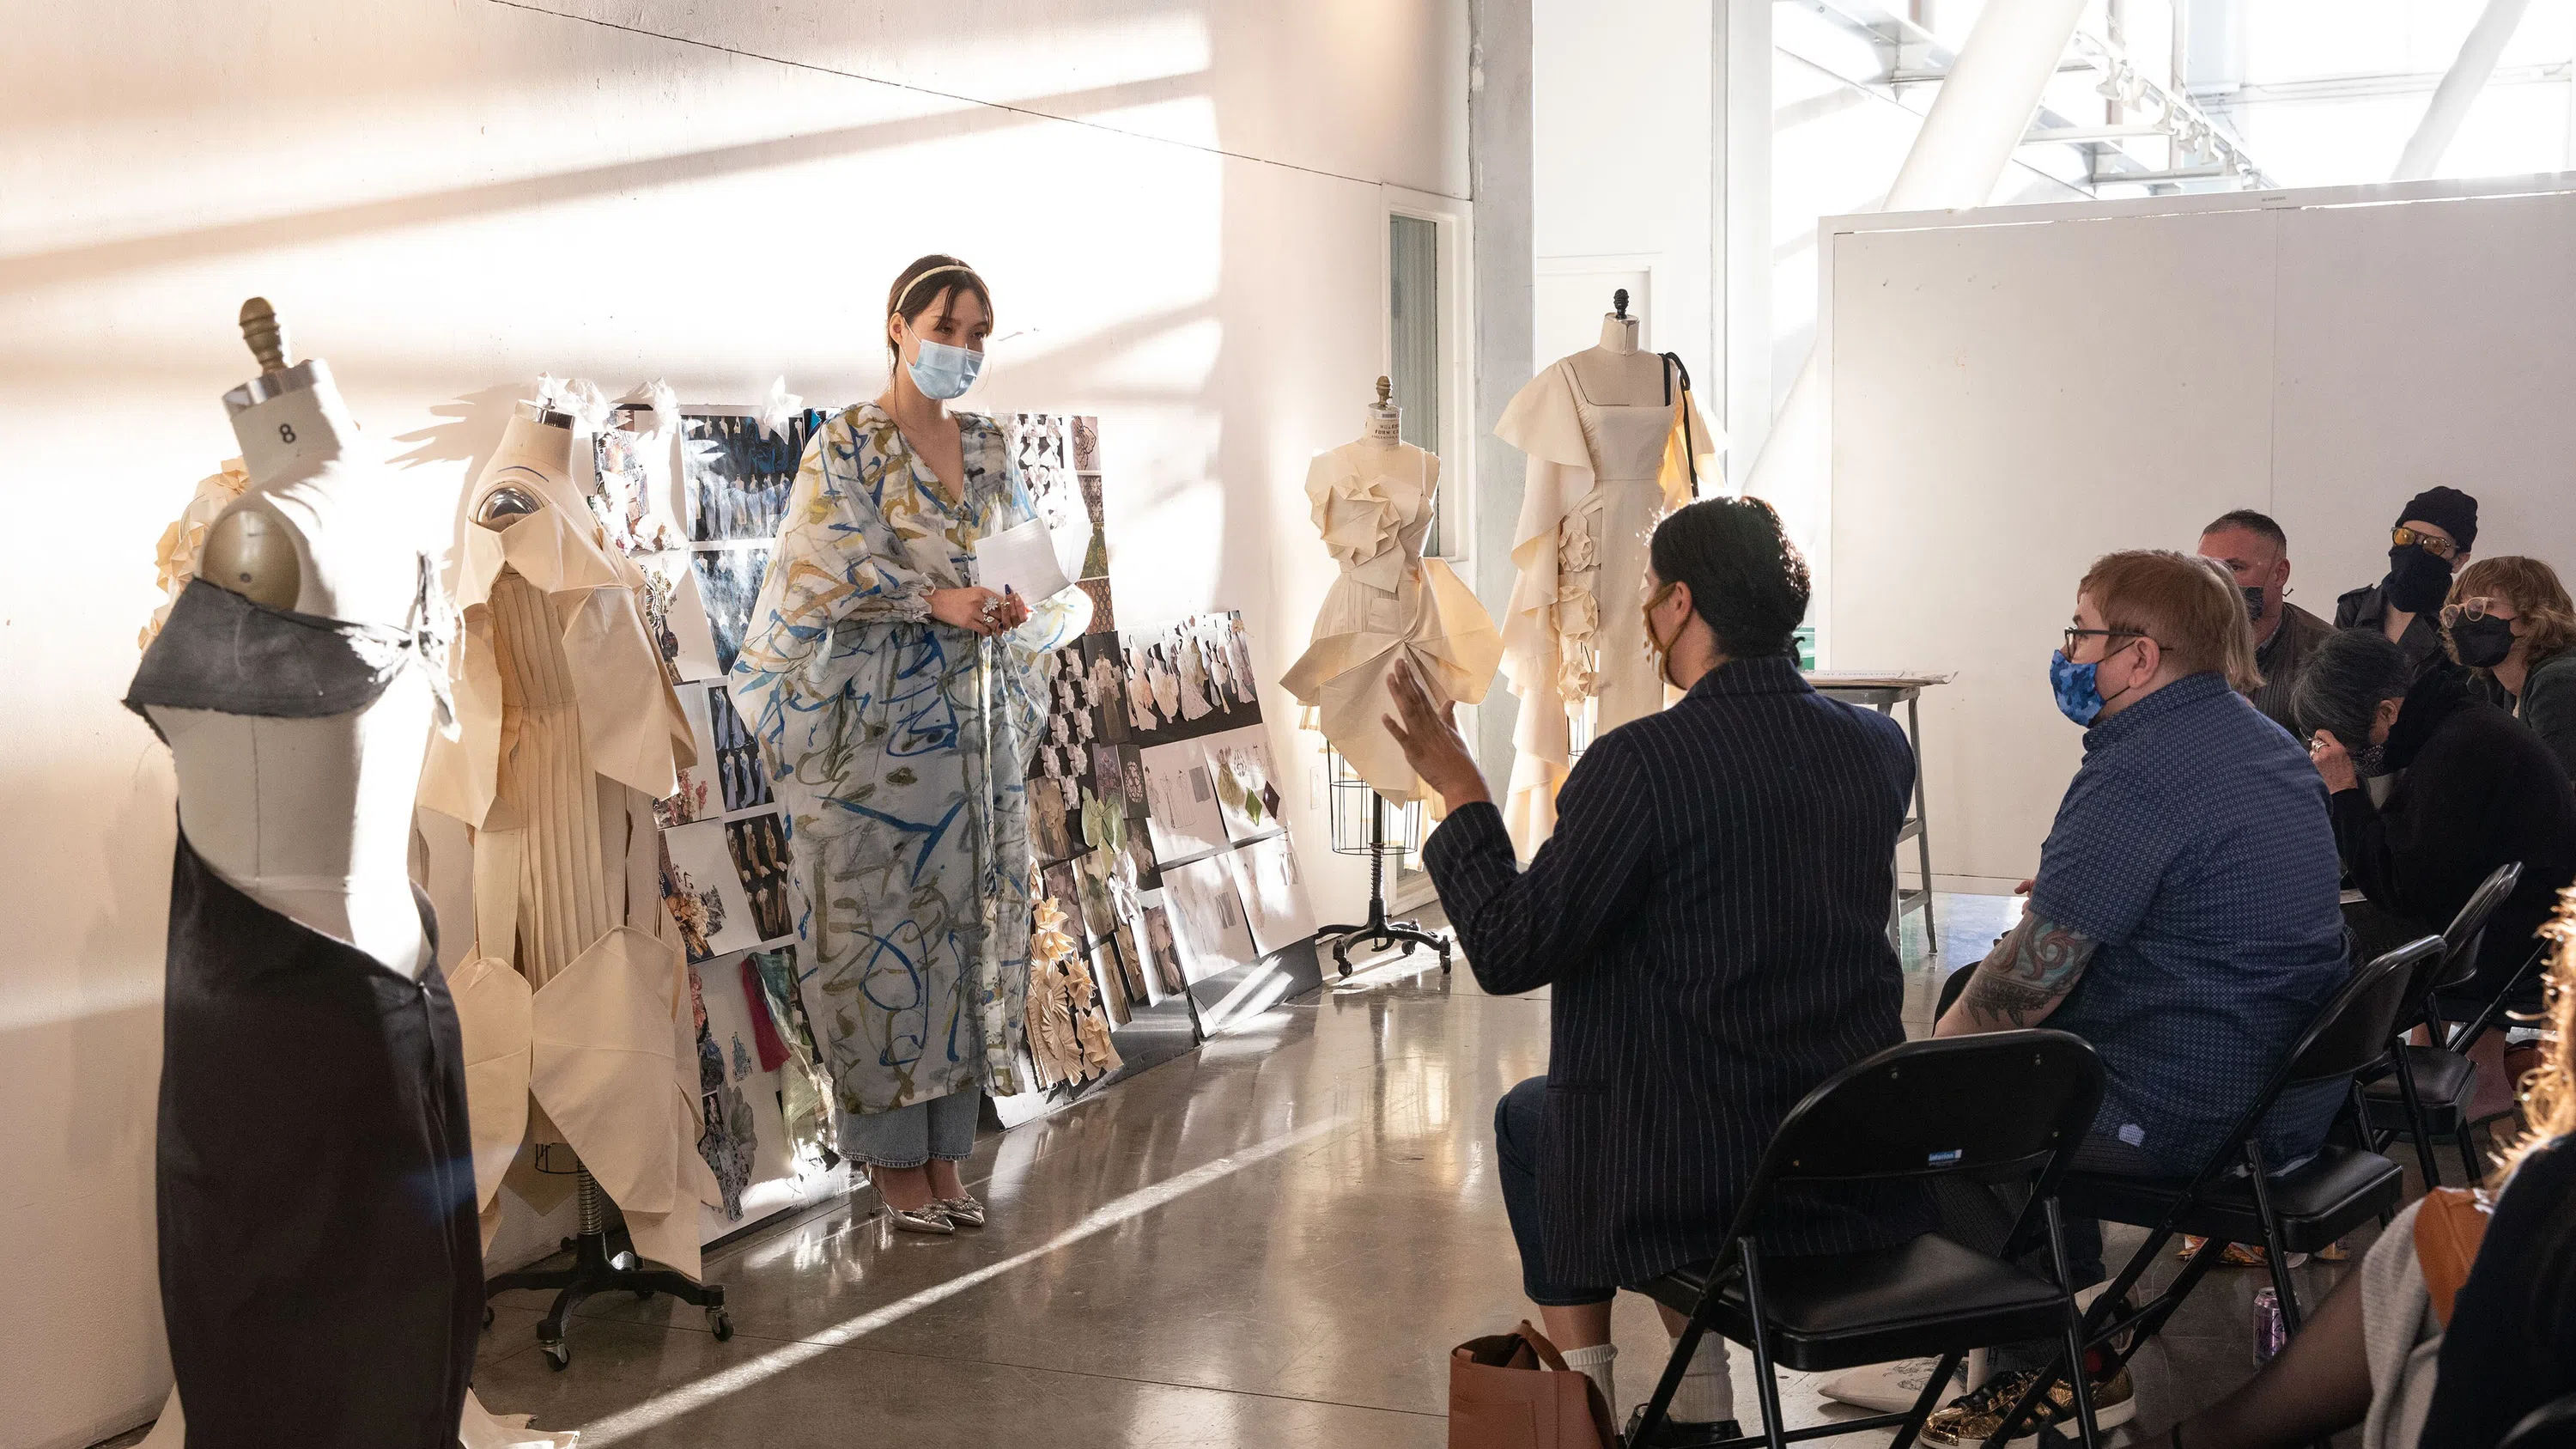 A Fashion Design student presents her designs to a panel during critique in the Nave.